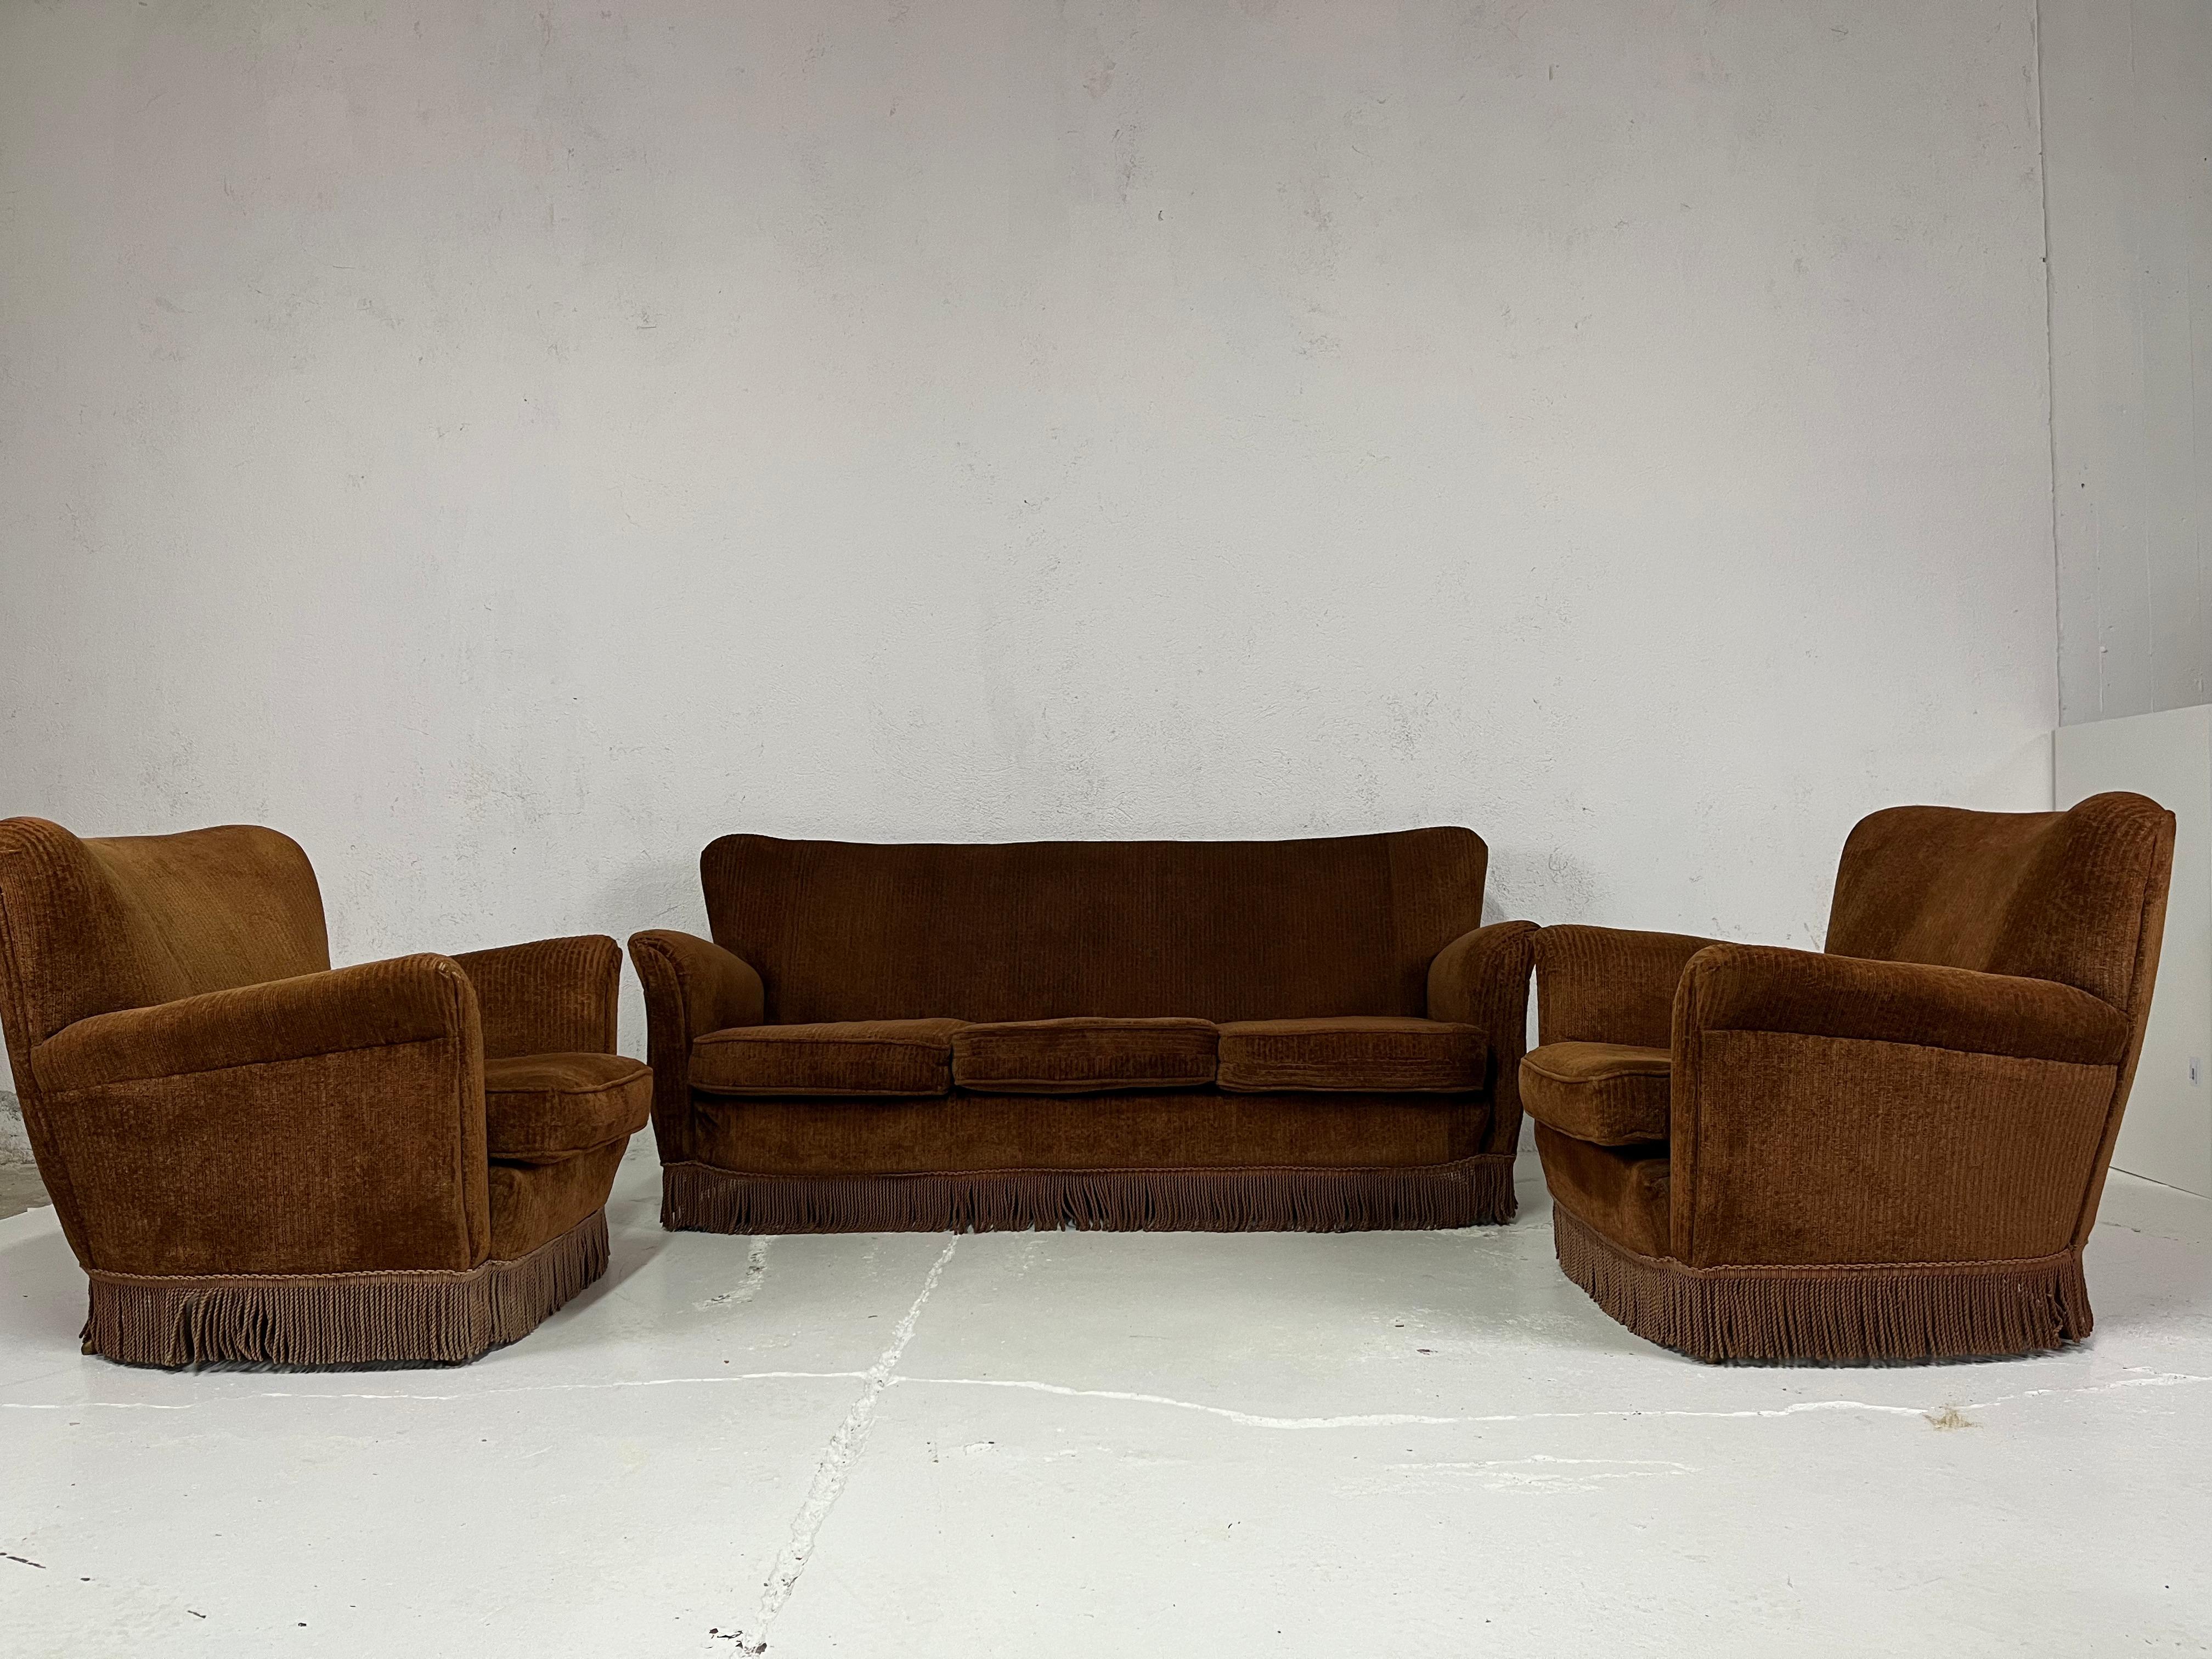 Beautiful set consisting of a sofa and two armchairs in brown corduroy with solid brass feet, made by Isa in the 1950s.

The set is in very good overall condition, the original fabric is virtually perfect, minor faults on the armrests of the chairs